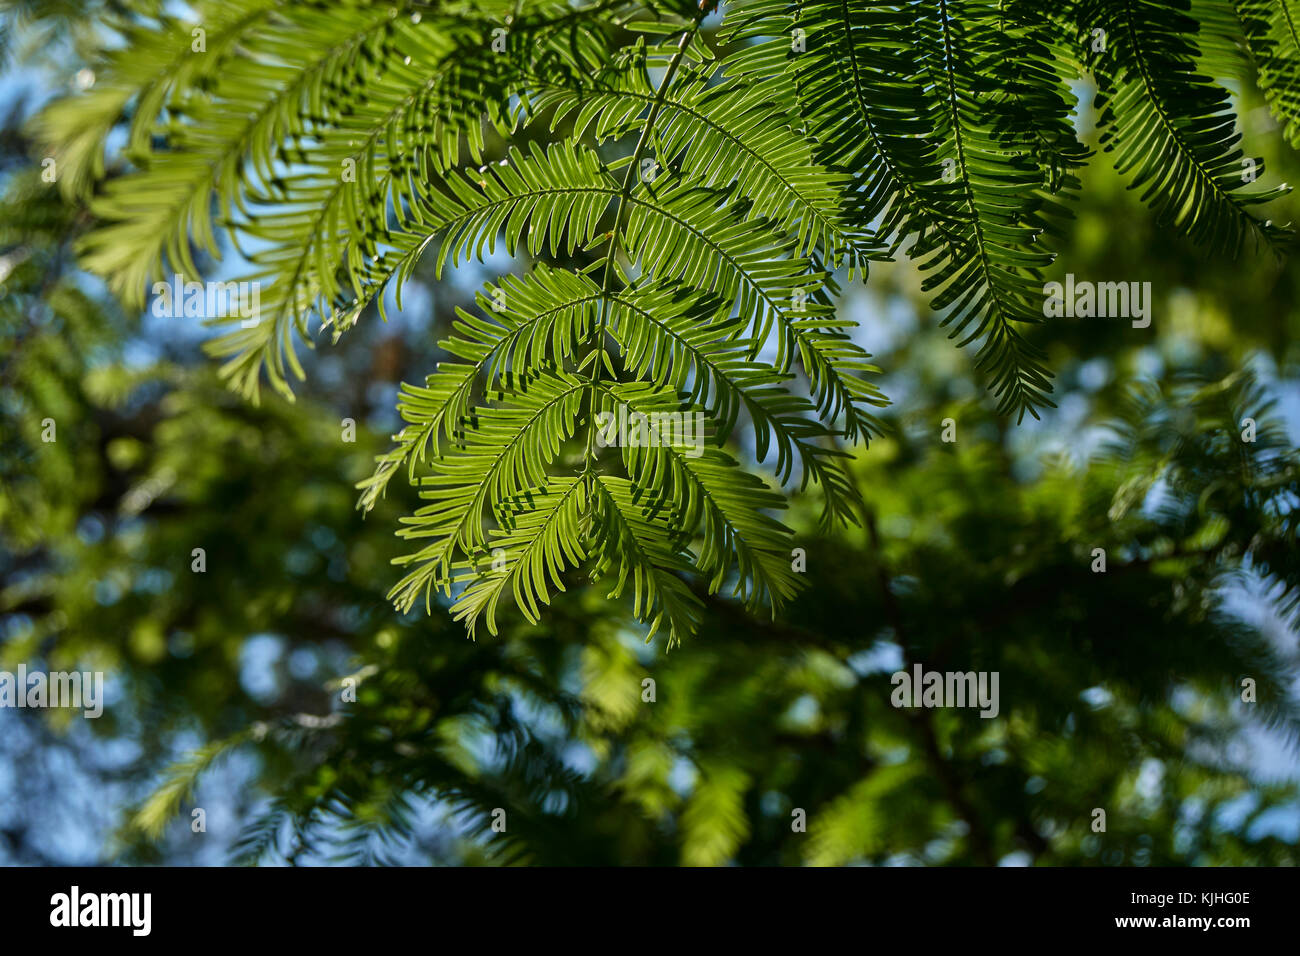 close-up of branches, looking up through evergreen leaves with blue sky ...